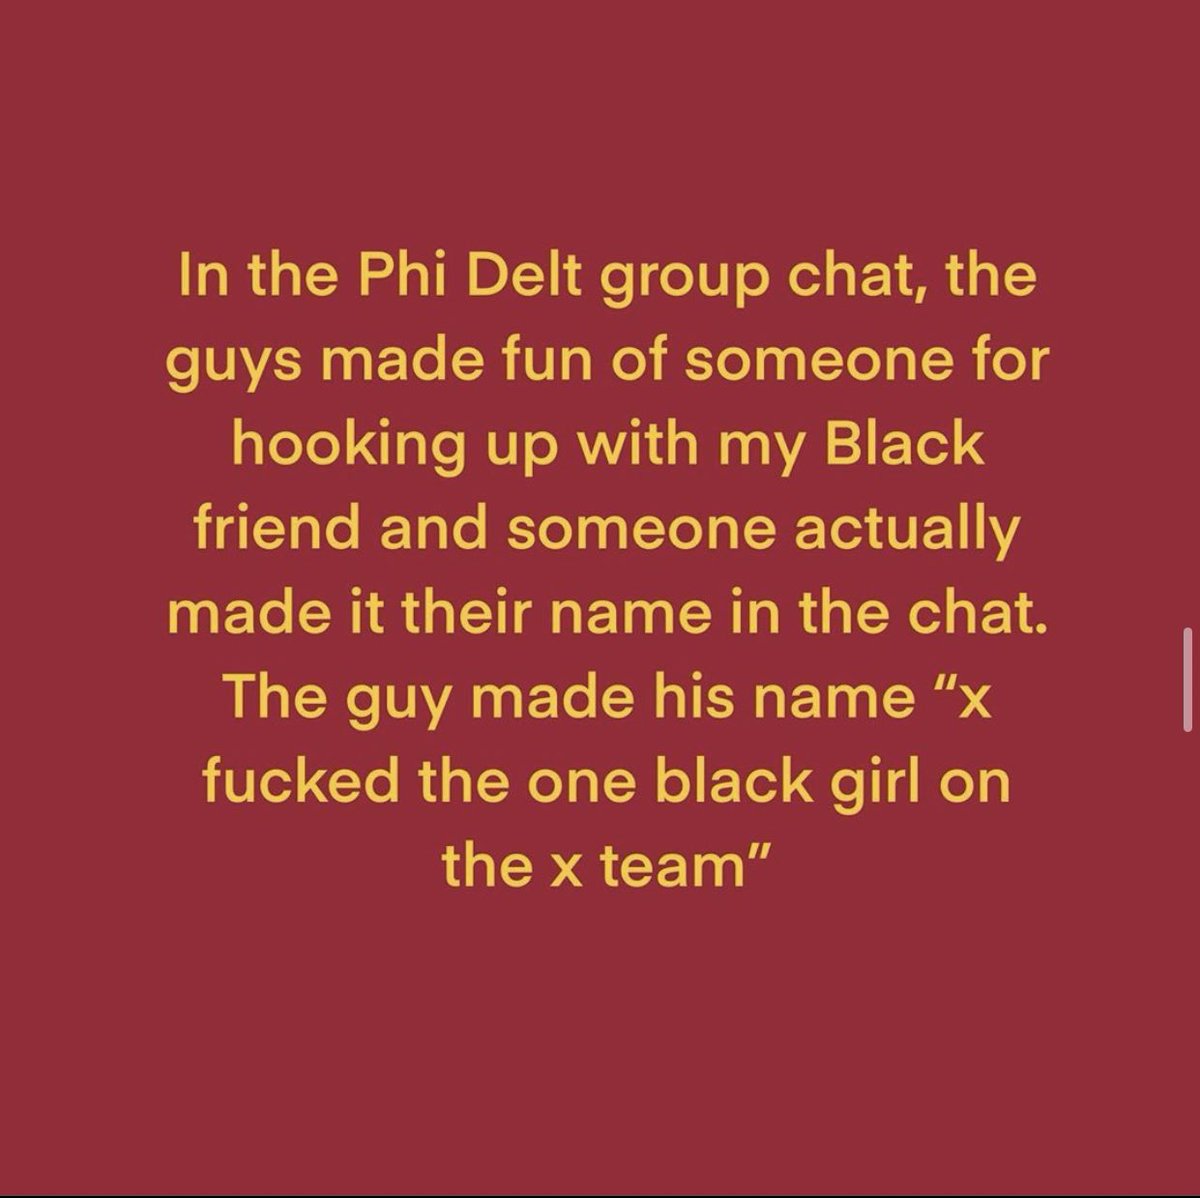 PLS RT: THREAD ON BEING BLACK AT USC! i’m gonna start from the ig page @/black_at_usc but i also want to ask that black USC students, professors, alumnae, faculty, or staff who feel comfortable share in my DMs some of their experiences at USC! i can repost anonymously (or not)